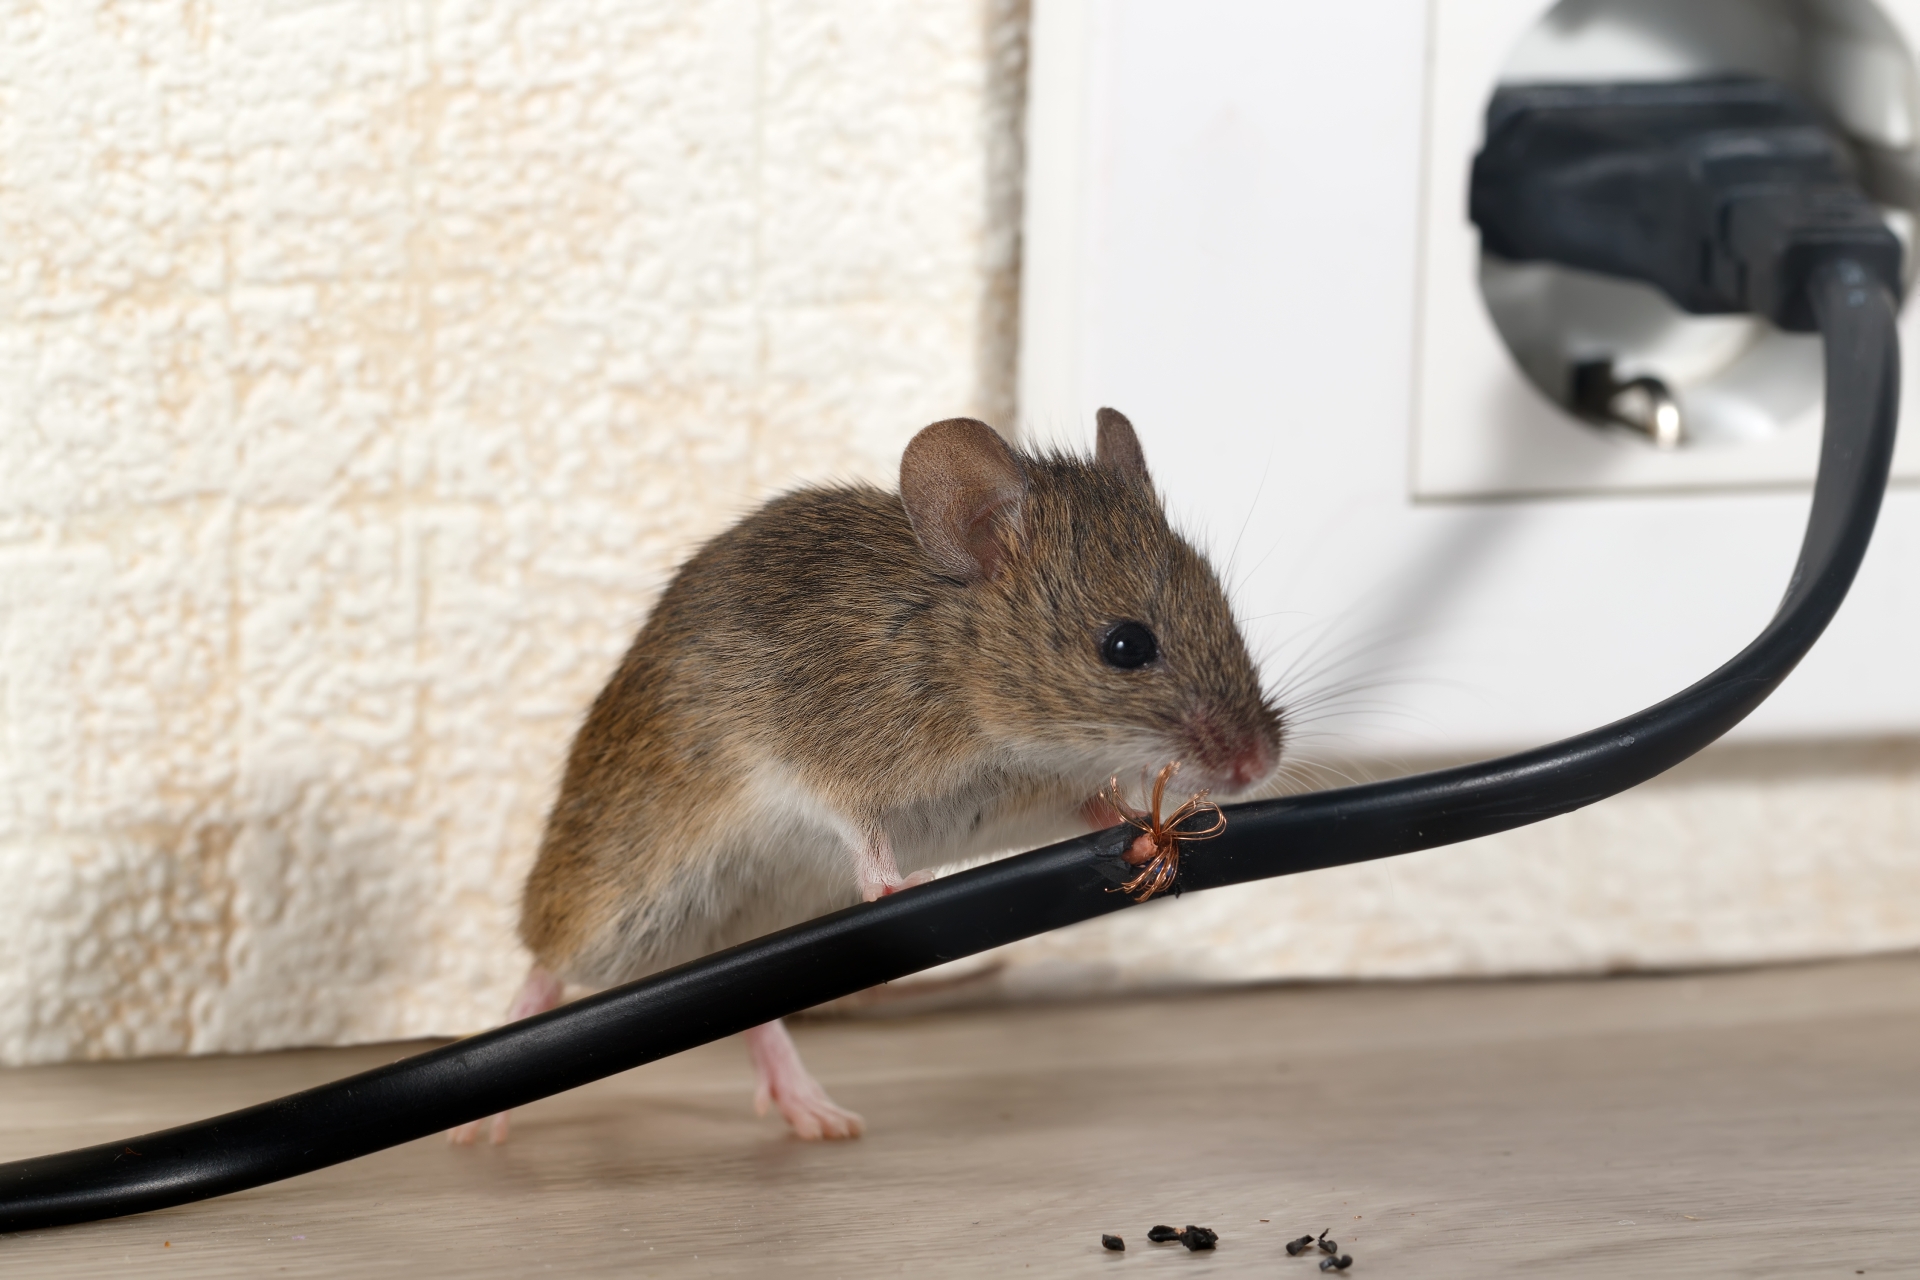 Mice Infestation, Pest Control in Maida Vale, Warwick Avenue, W9. Call Now 020 8166 9746